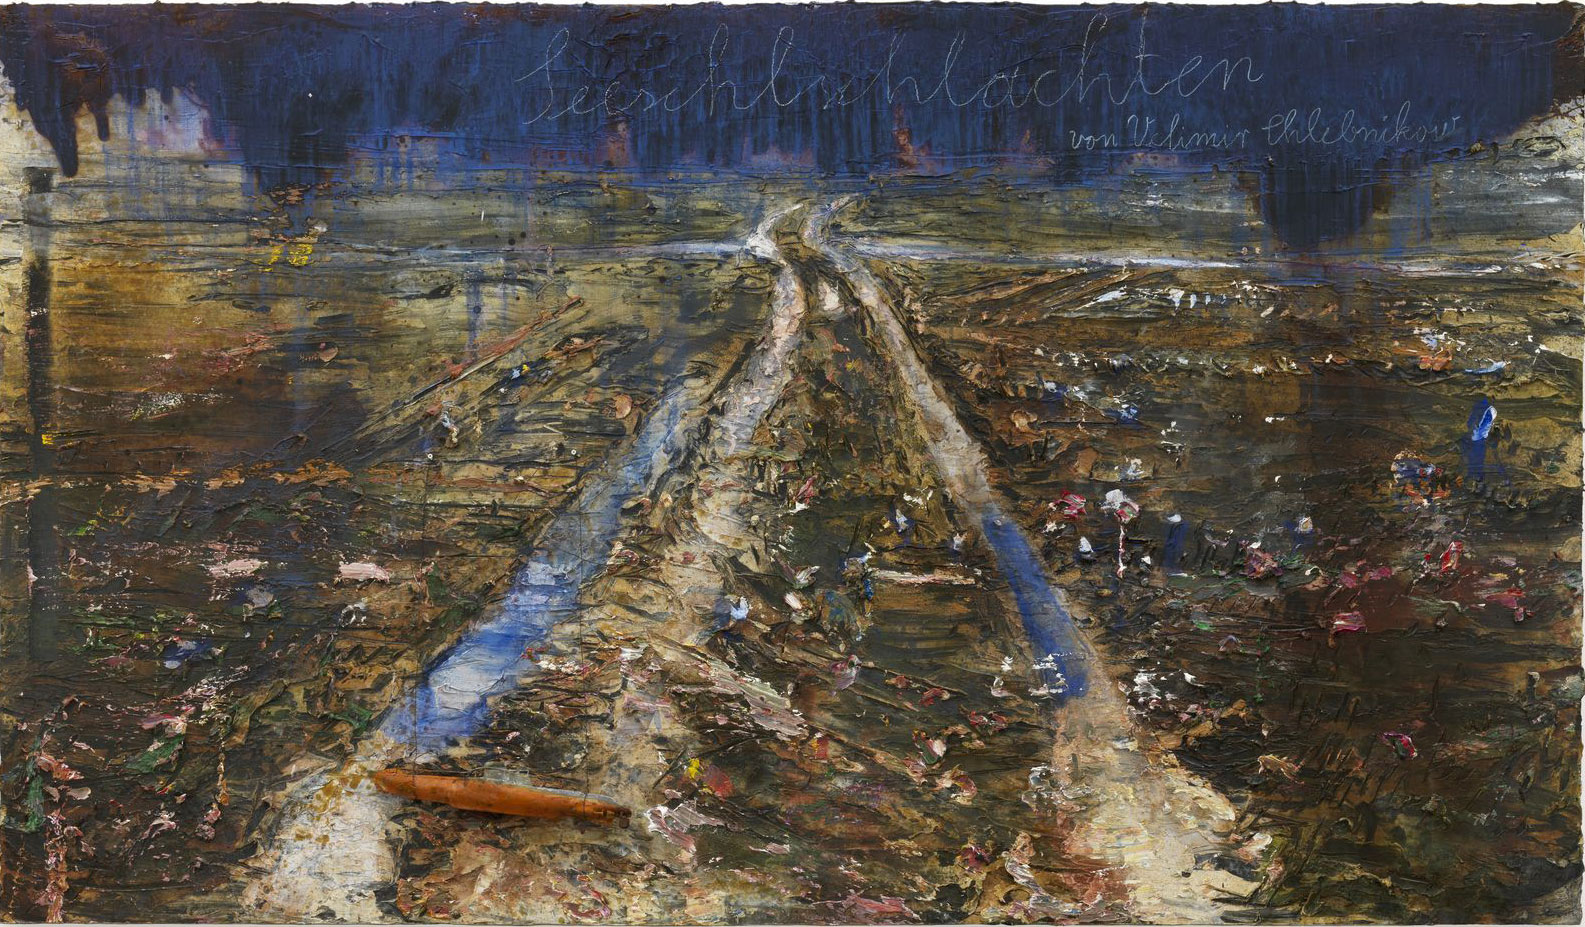 Battles at Sea by Velimir Khlebnikov by Anselm Kiefer. Photo: Charles Duprat. Image courtesy of the Hermitage